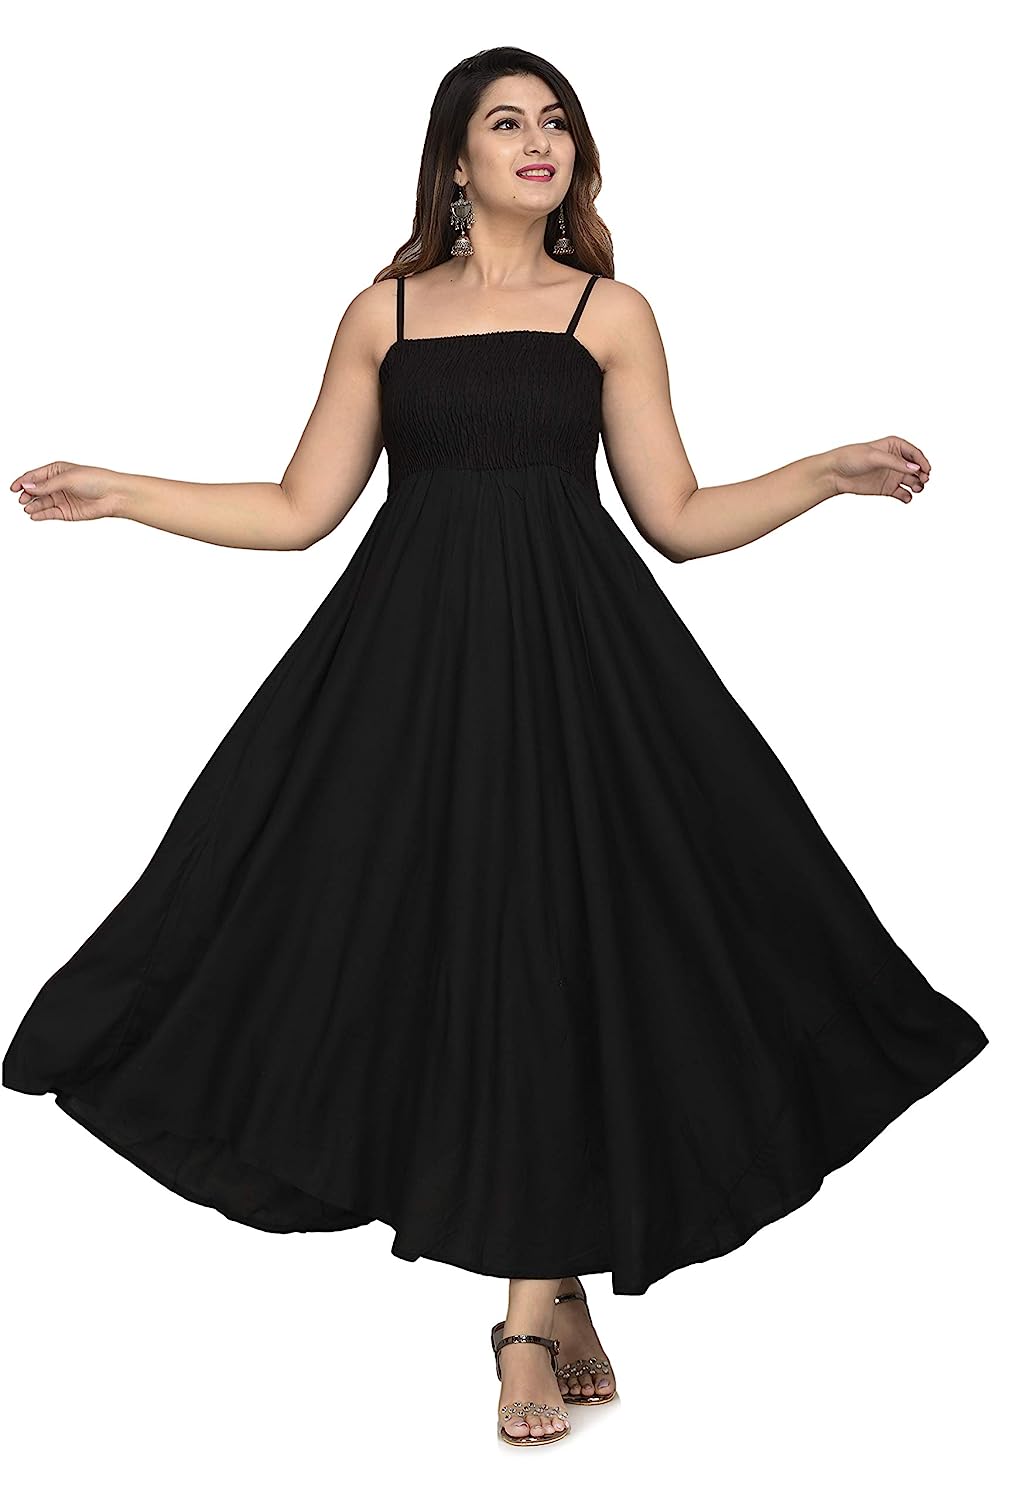 Buy Black Stunning Designer Party Wear Gown | Gowns